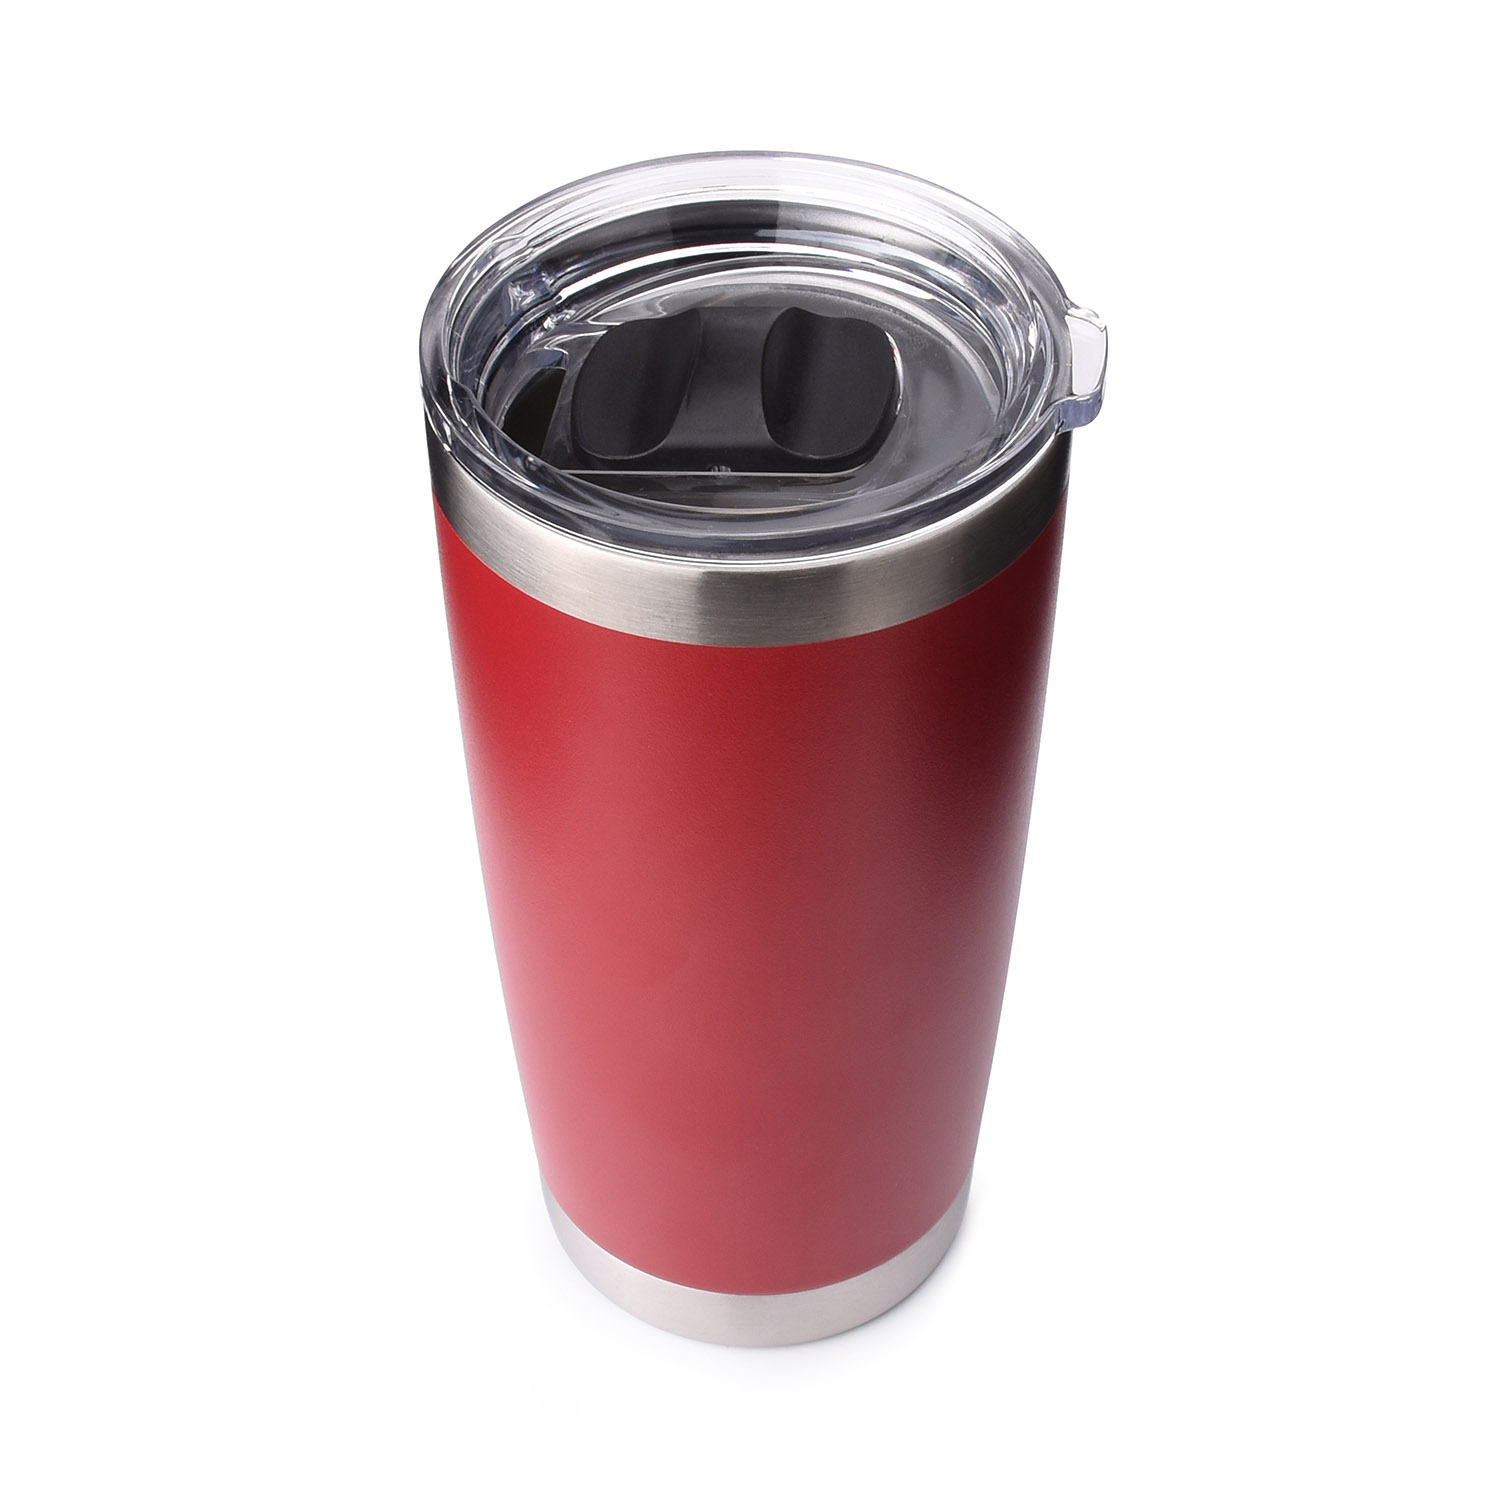 https://www.waterbottle.tech/wp-content/uploads/2021/05/20-oz-tumbler-with-magnetic-slider-lid-s2120a3-2.jpg